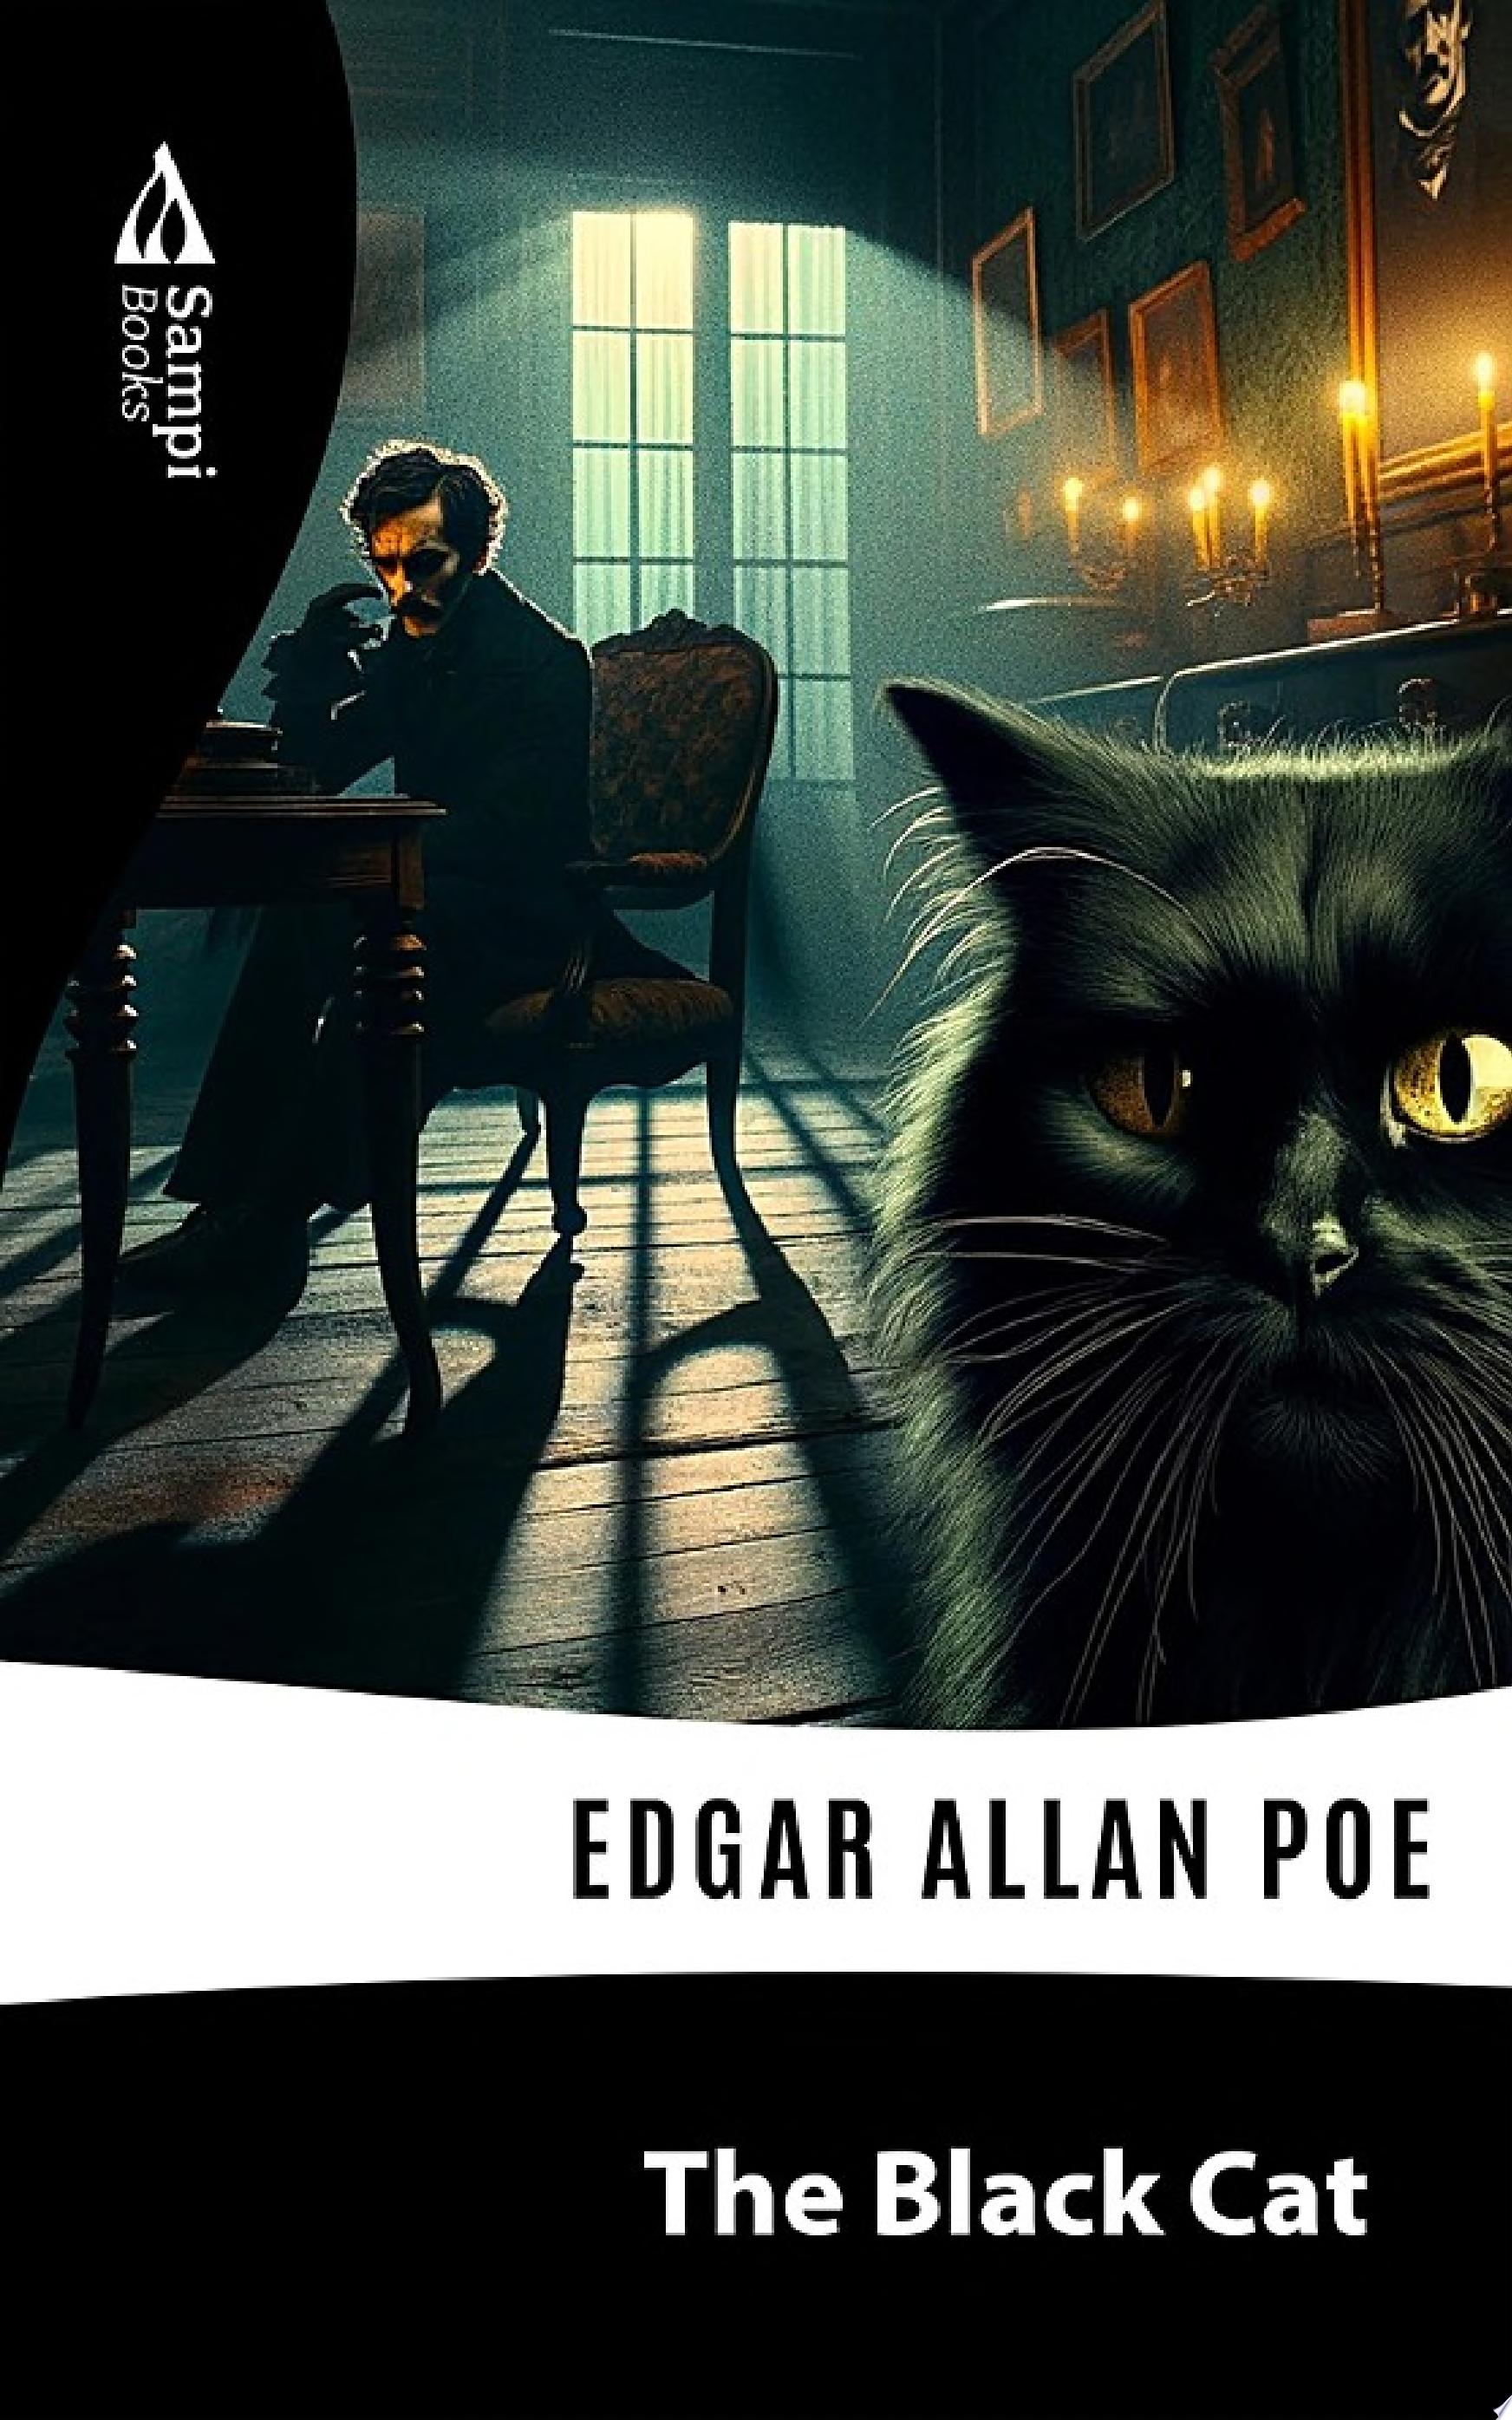 Image for "The Black Cat"